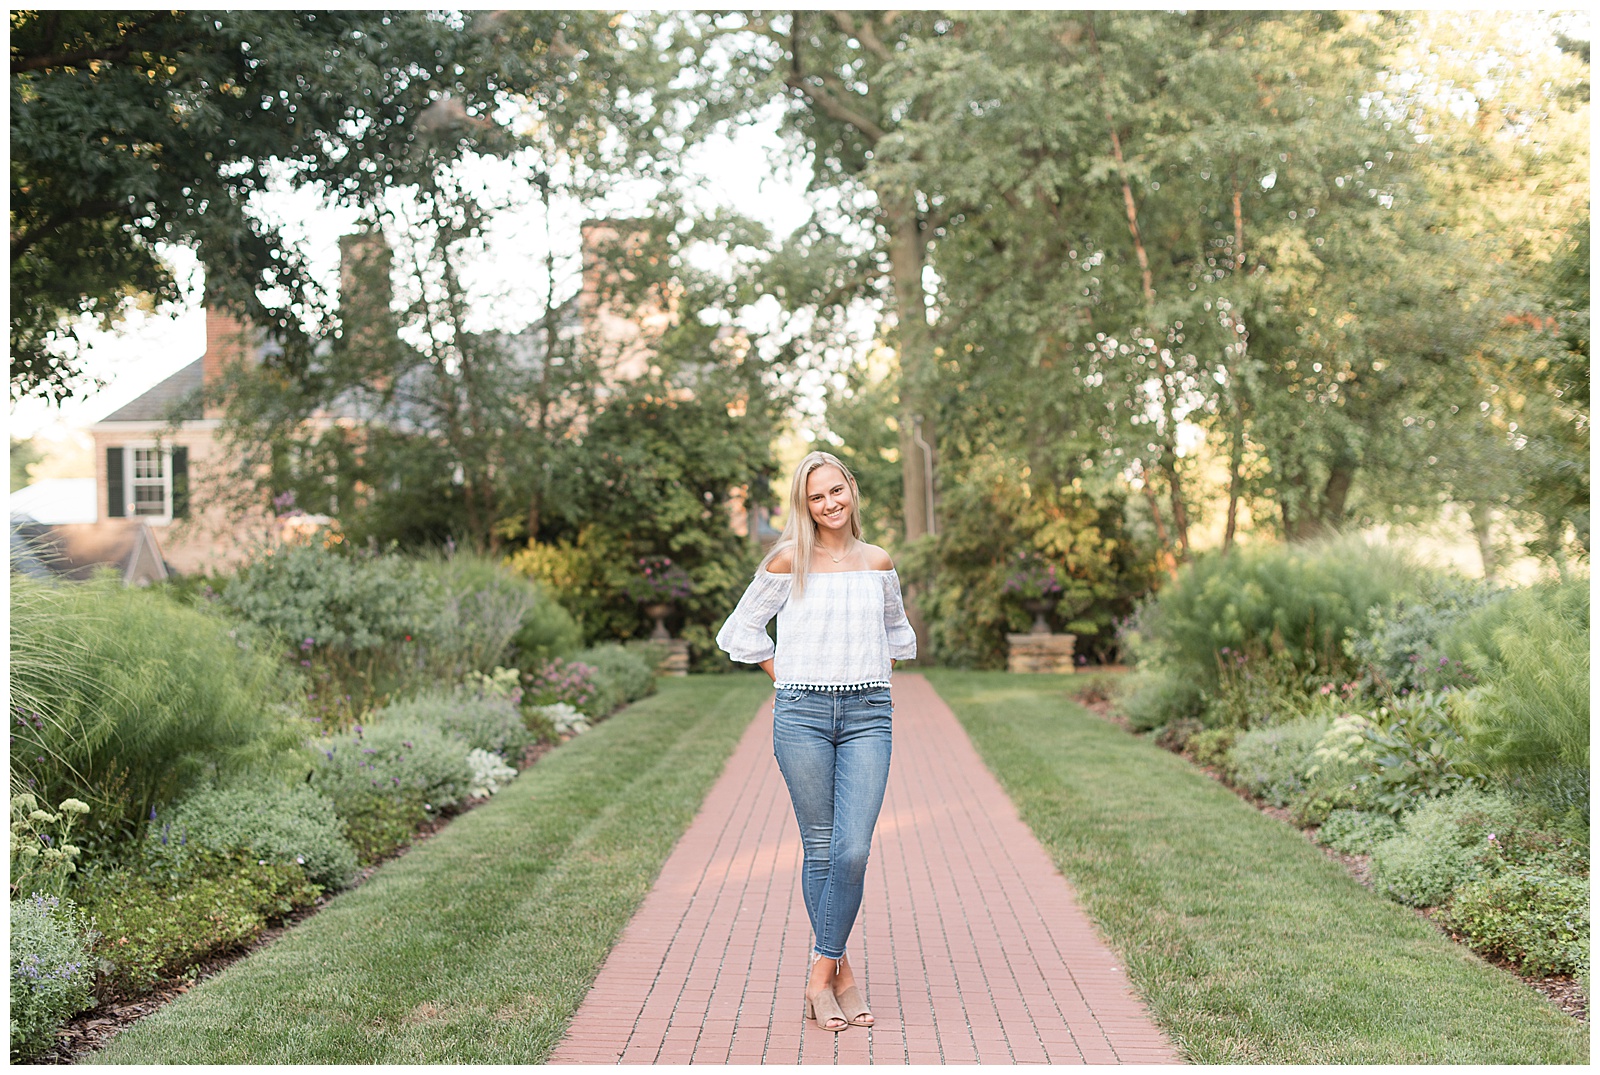 girl standing on brick walkway surrounded by plants and trees smiling at camera with hands on hips